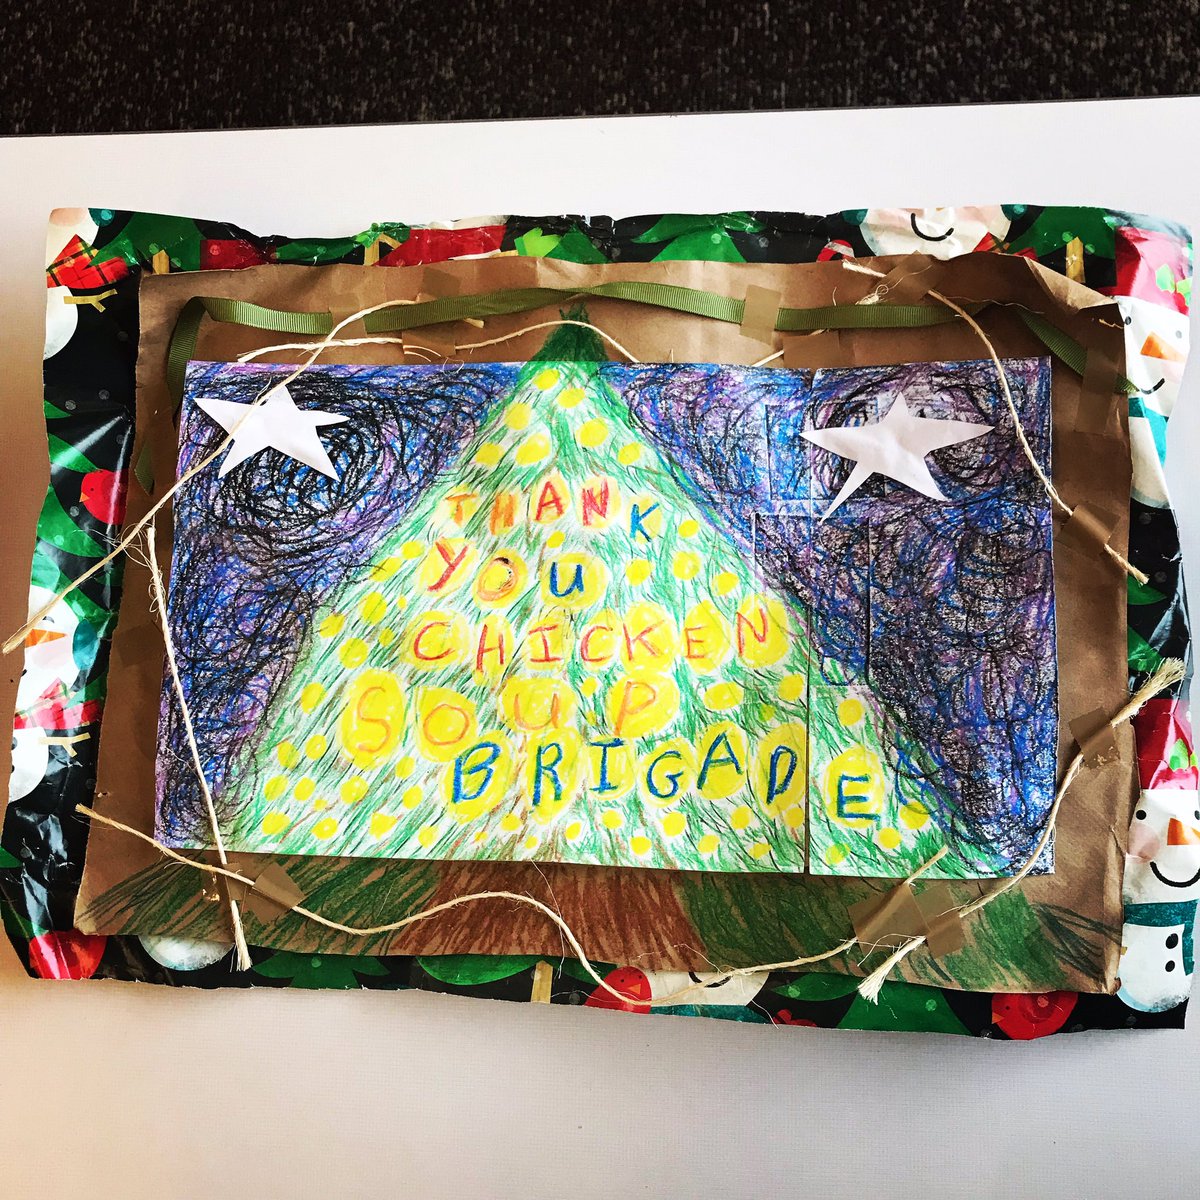 A Lifelong client sent us this beautiful, homemade thank you card for the holiday meals that they received from our Chicken Soup Brigade program. We love our clients. ❤️ Happy Holidays to all!